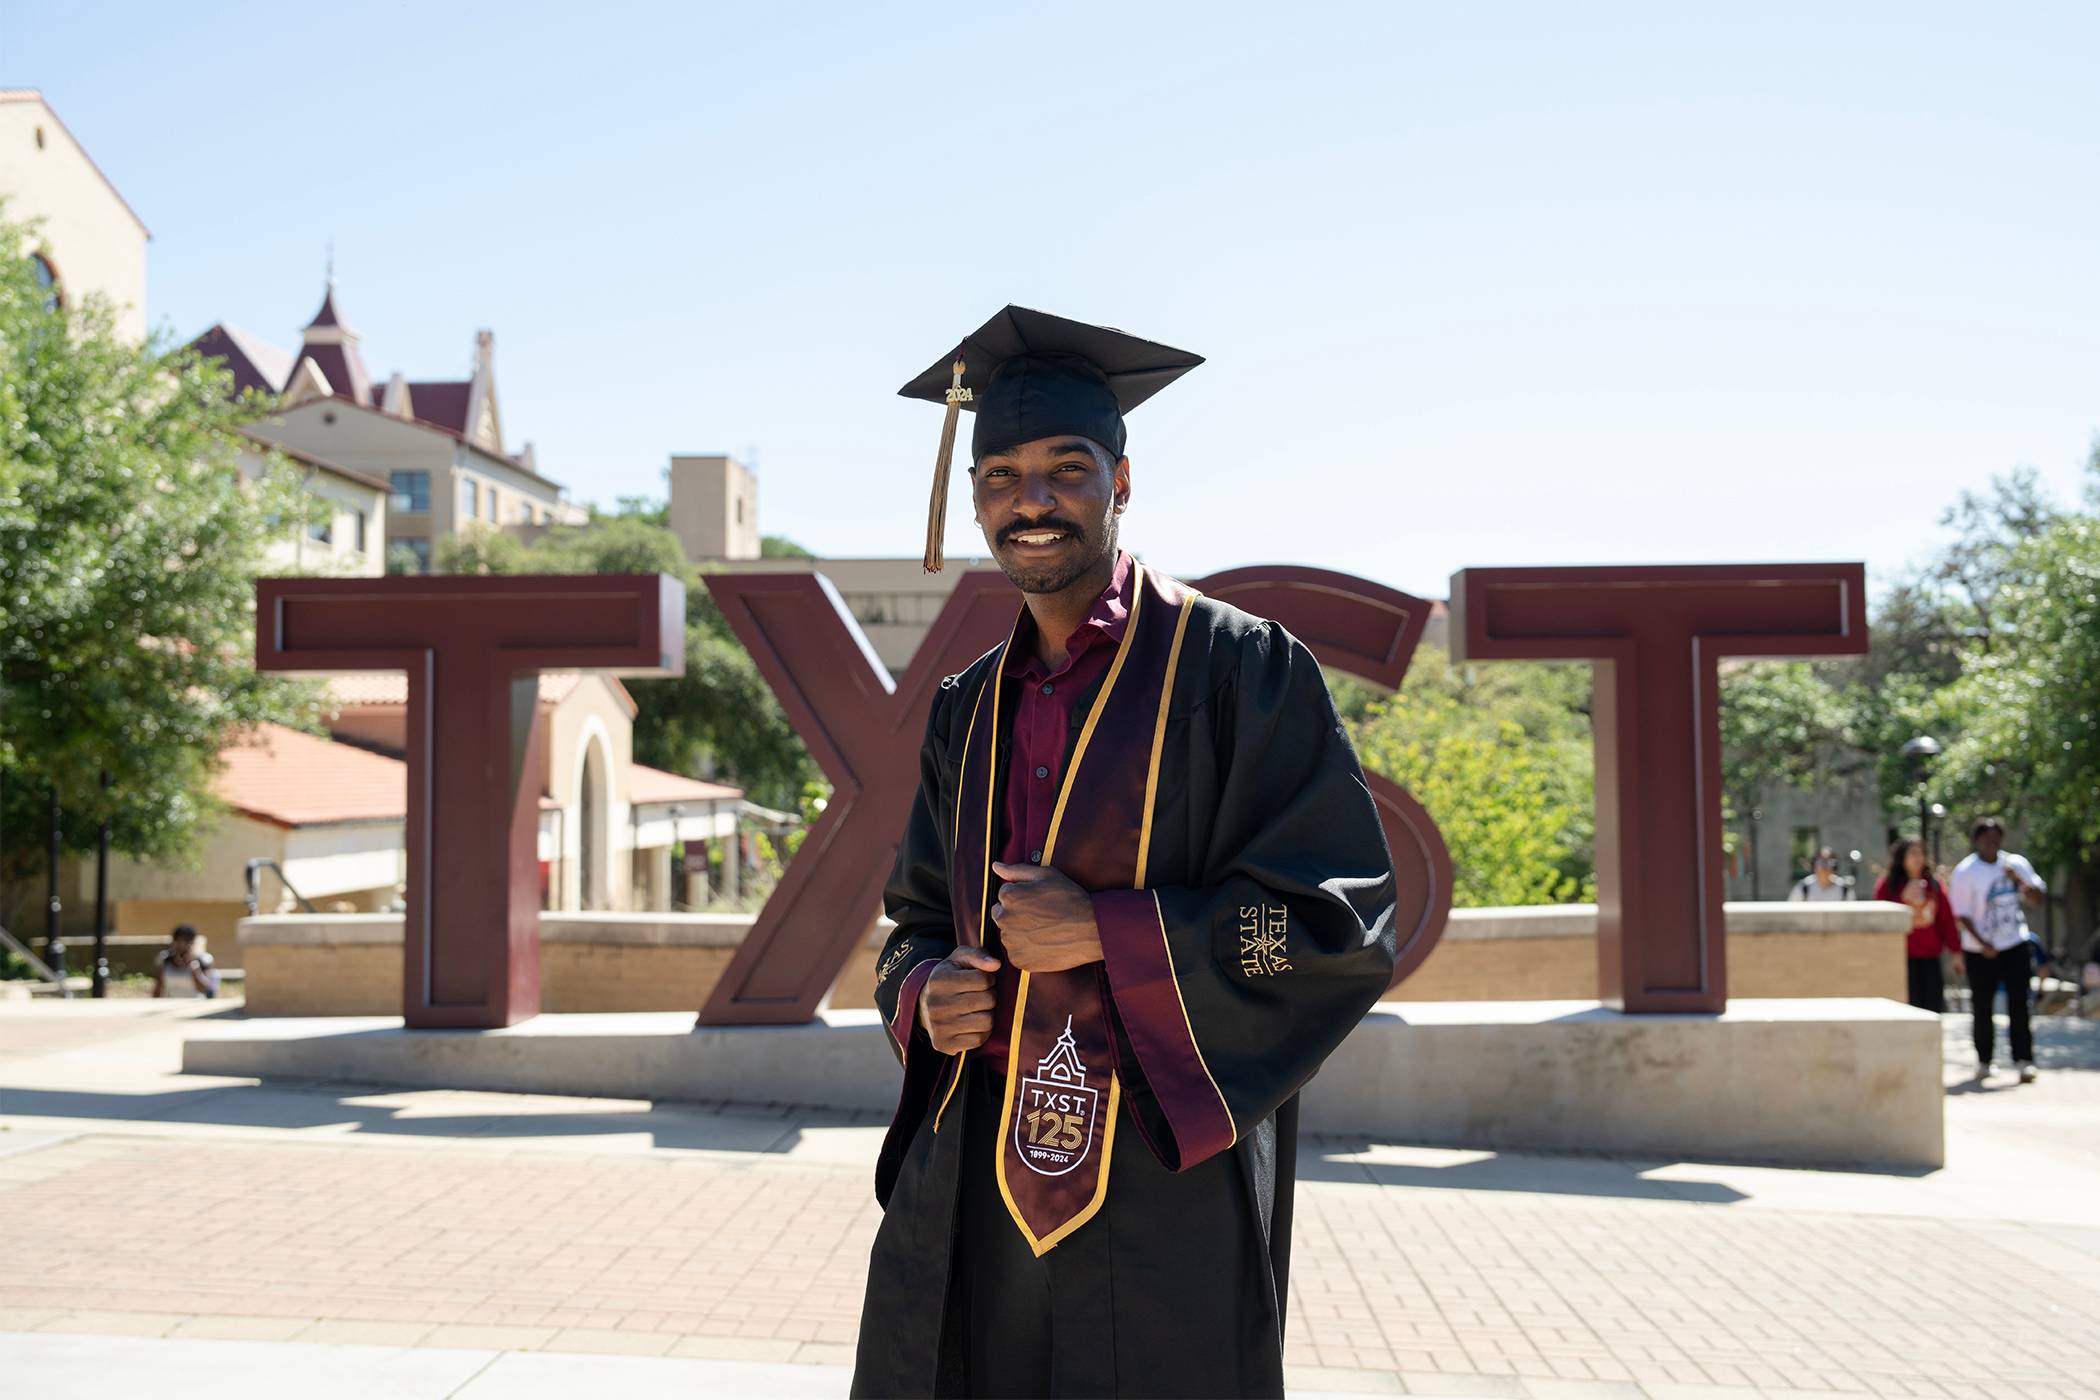 A proud young man dressed in his graduation regalia smiles for the camera as he adjusts his robes and stole. He's standing outside in front of the TXST statue on a bright and clear day, Old Main's distinct towers can be seen peeking out from behind the trees and buildings in the background.